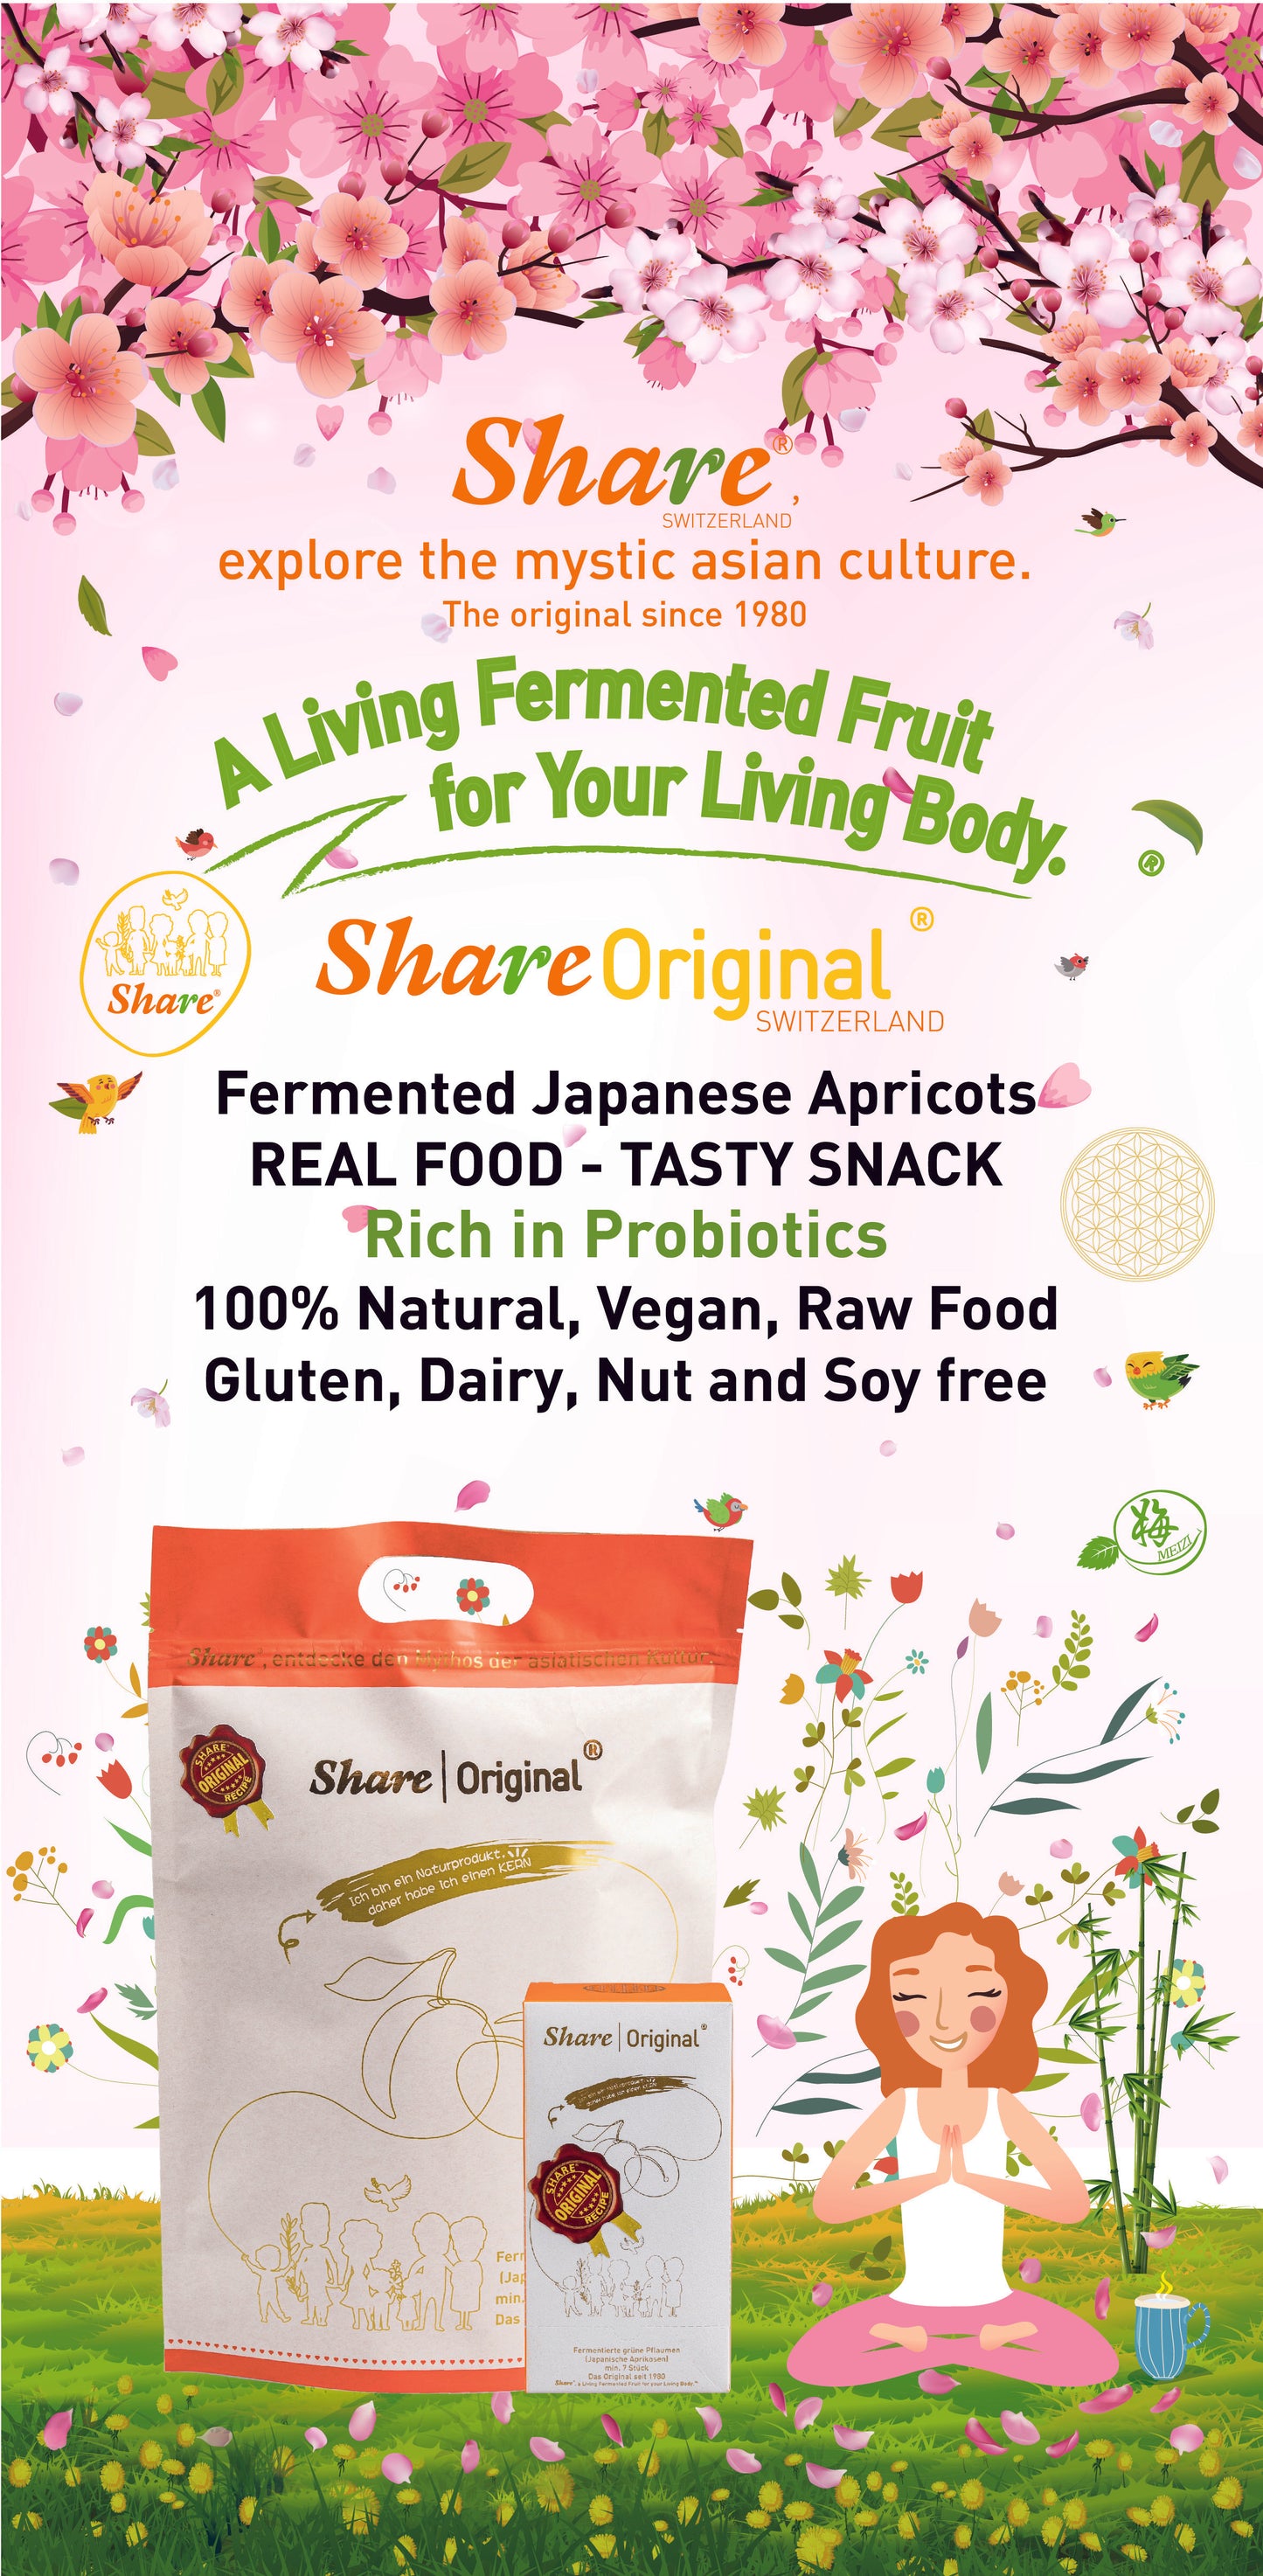 Share Original® Fermented Plum/Japanese Apricot (1.1lb Bag, 30~33pcs): 30+month naturally fermented, effective natural alternative to lab-made laxatives & probiotics, vegan & non-GMO, individually wrapped packet easy for travel (Swiss-made, free shipping)